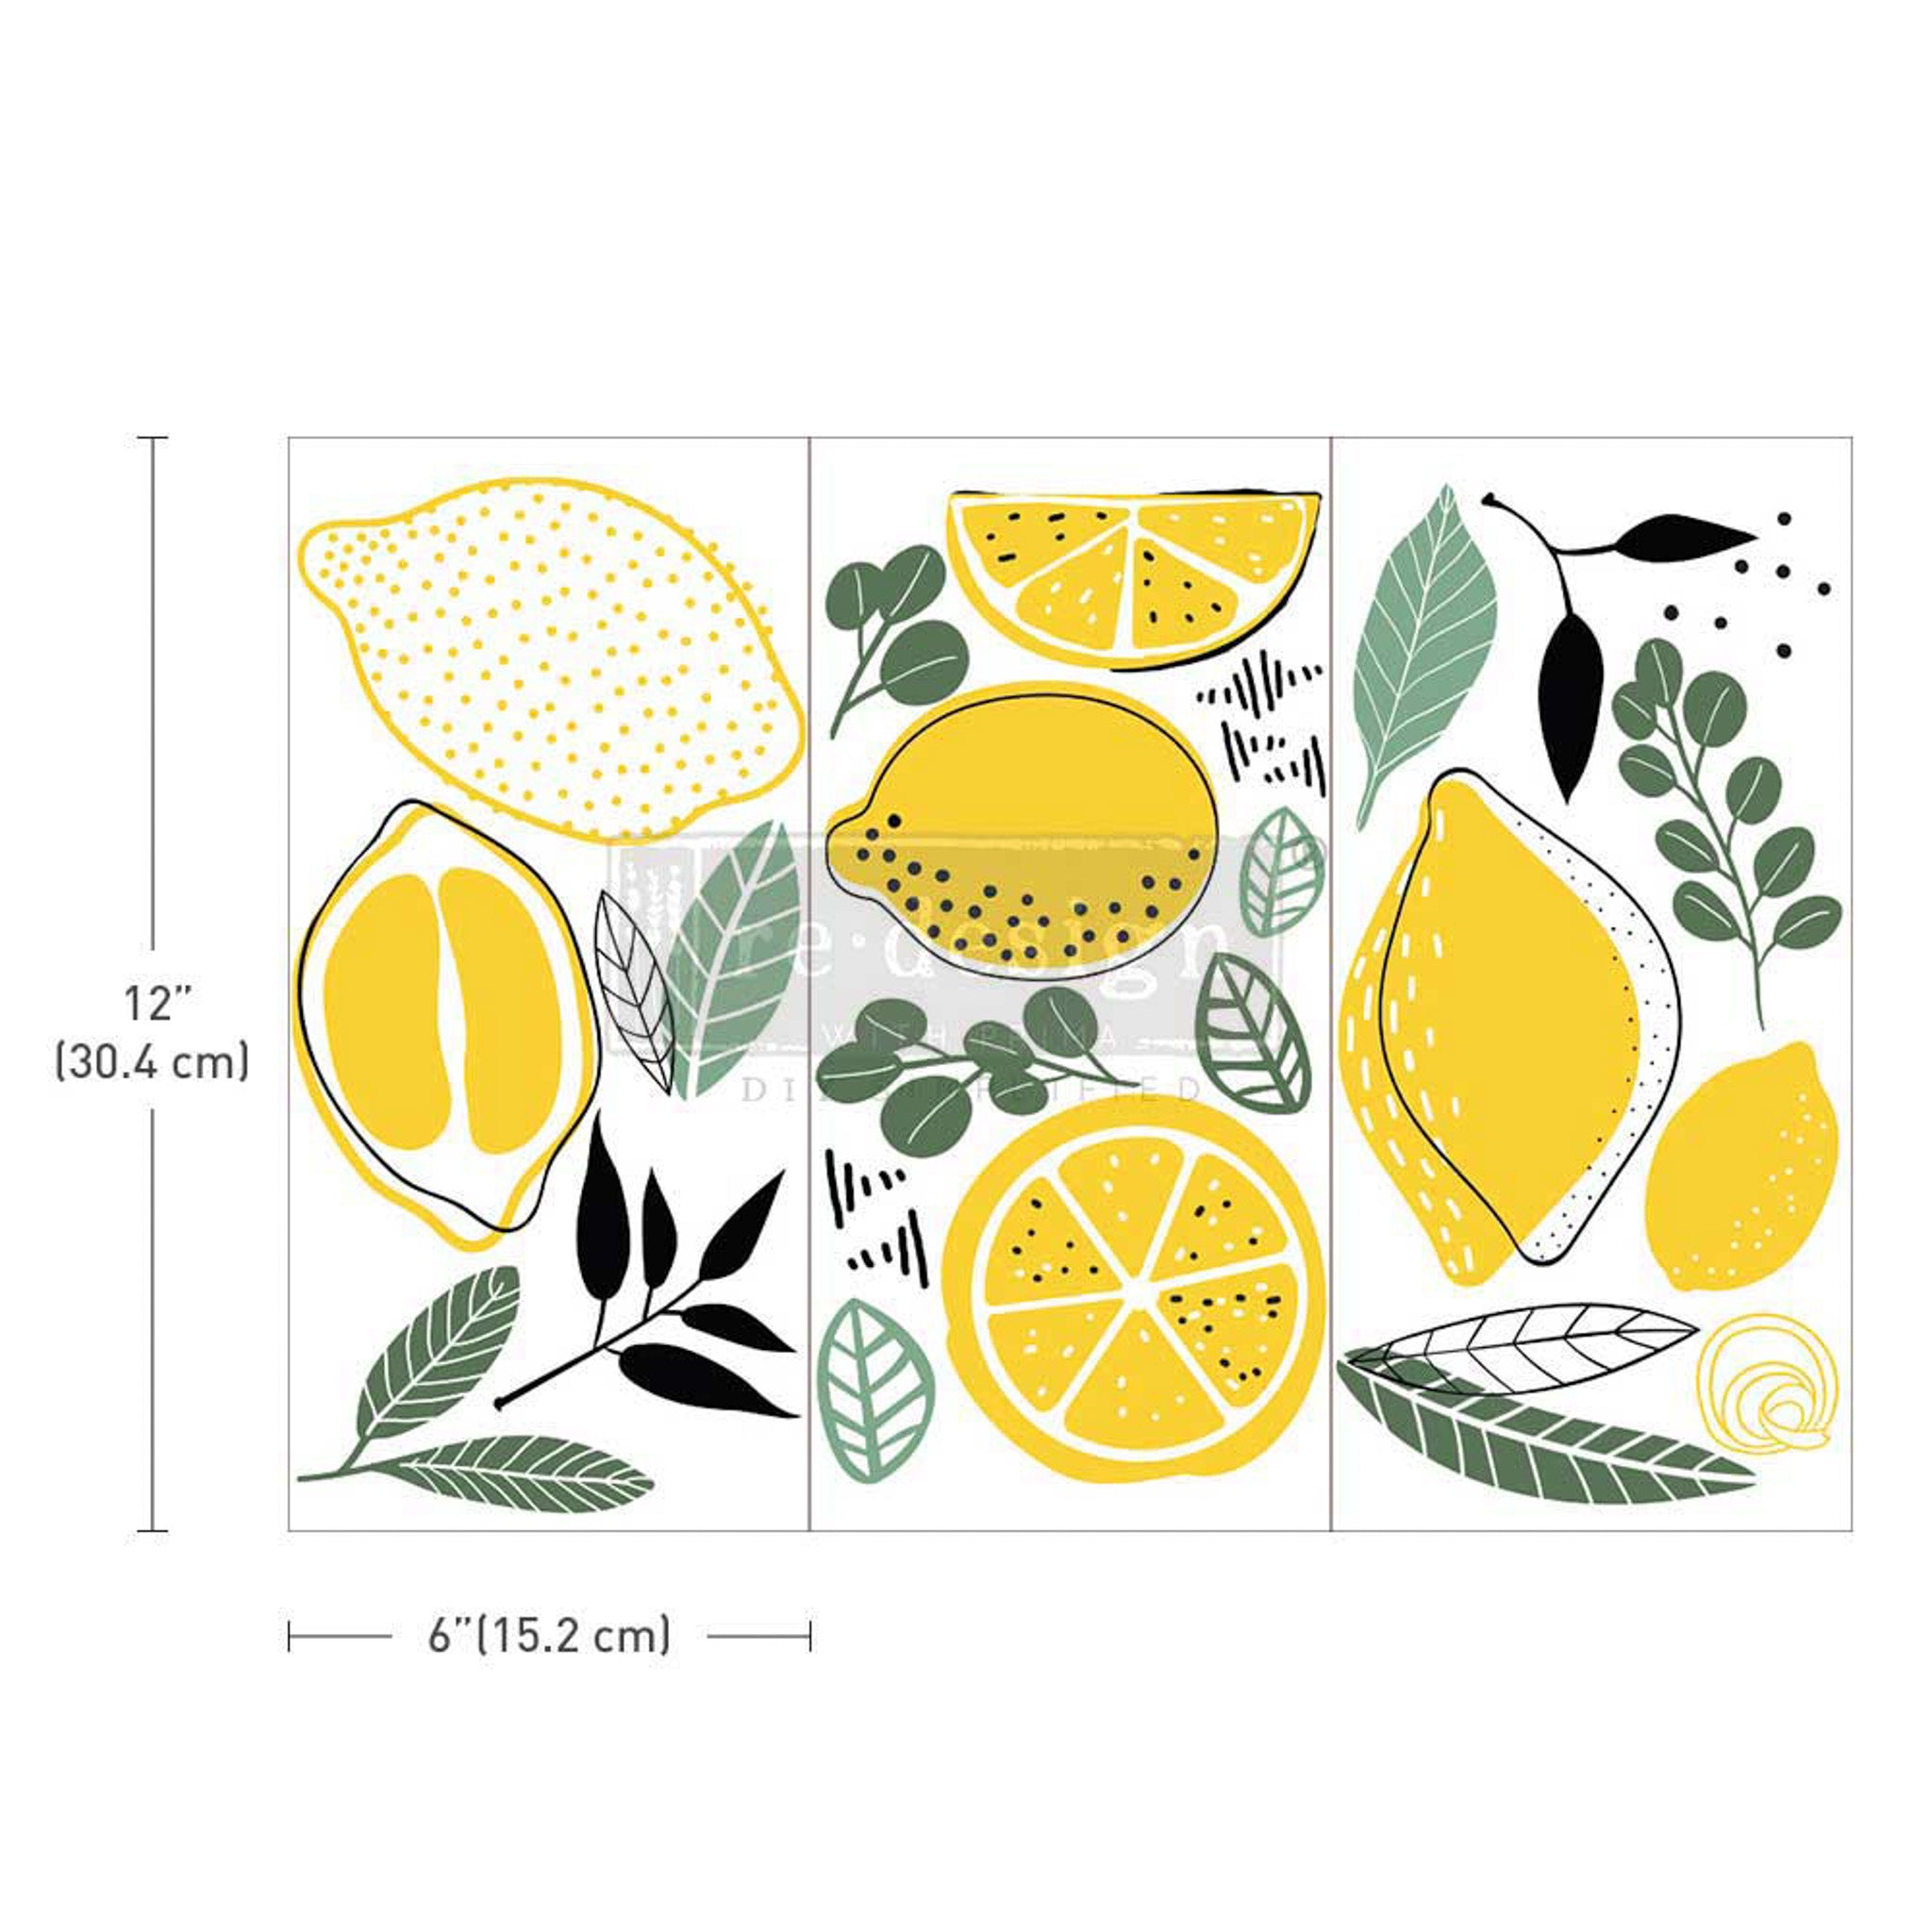 Three sheets of ReDesign with Prima's Lemon small transfer. Measurements for 1 sheet reads: 12" [30.4 cm] by 6" [15.2 cm].